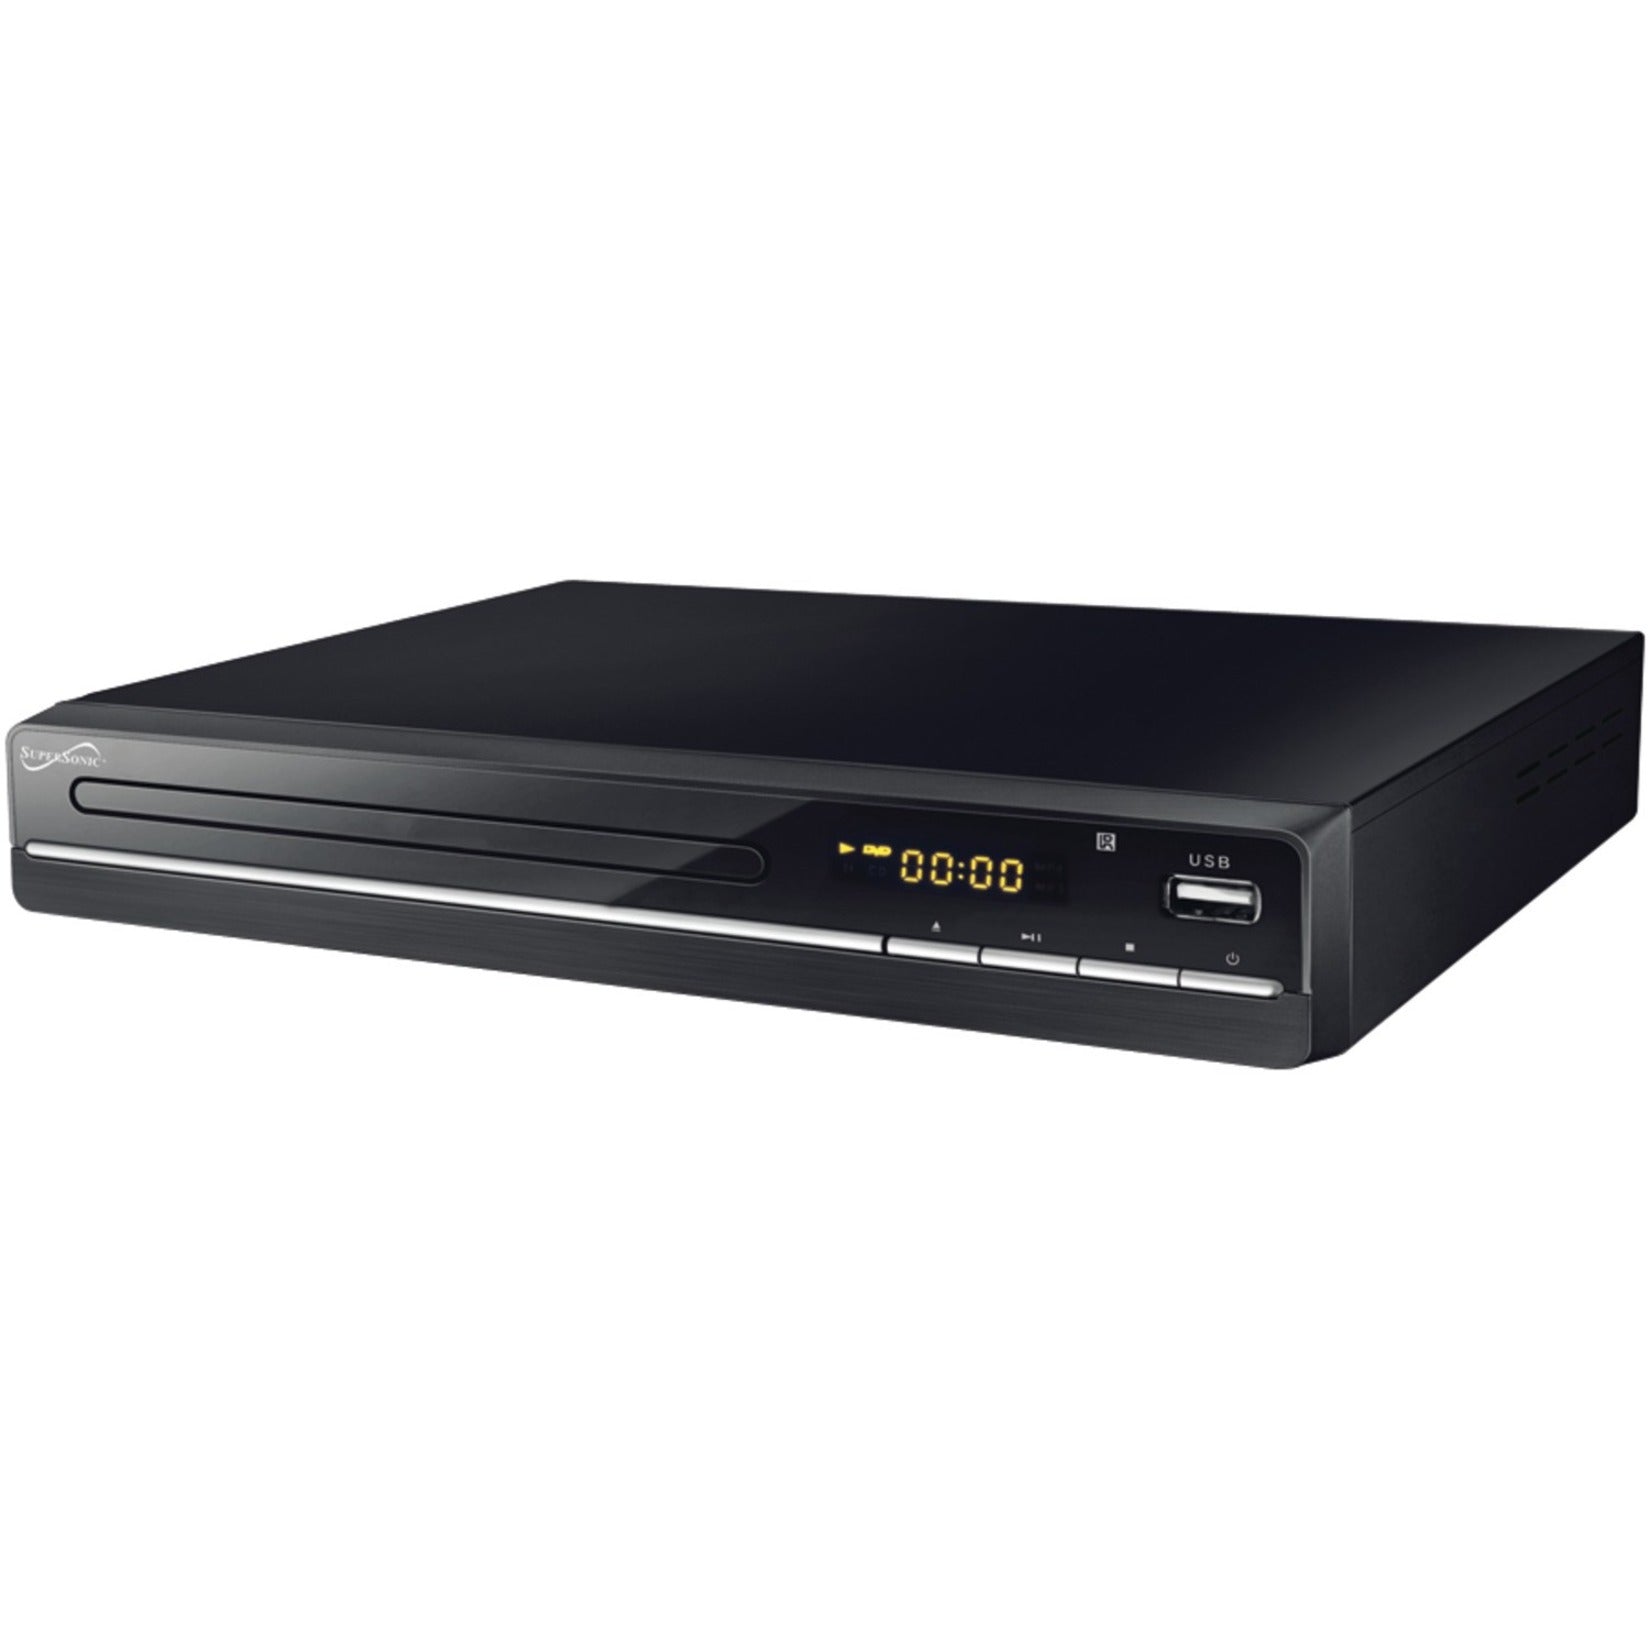 Supersonic SC-20H 2.0 Channel DVD Player with HDMI Output, Surround Sound, NTSC/PAL Video Signal Format, SD Memory Card Supported, 90 Day Limited Warranty, Black